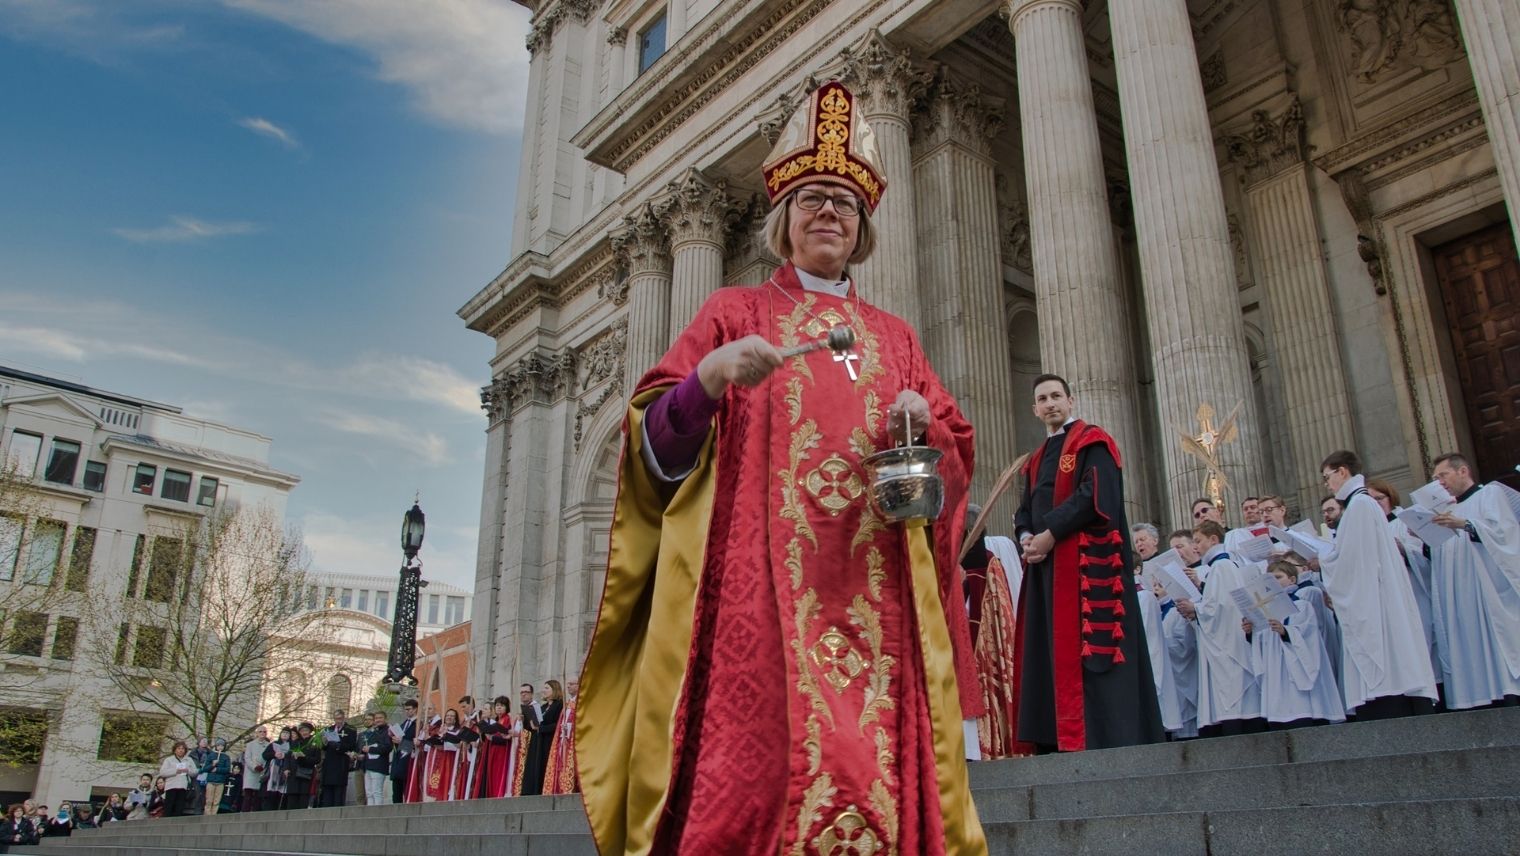 Bishop Sarah Mulally at the steps of St Paul's on Palm Sunday 2021